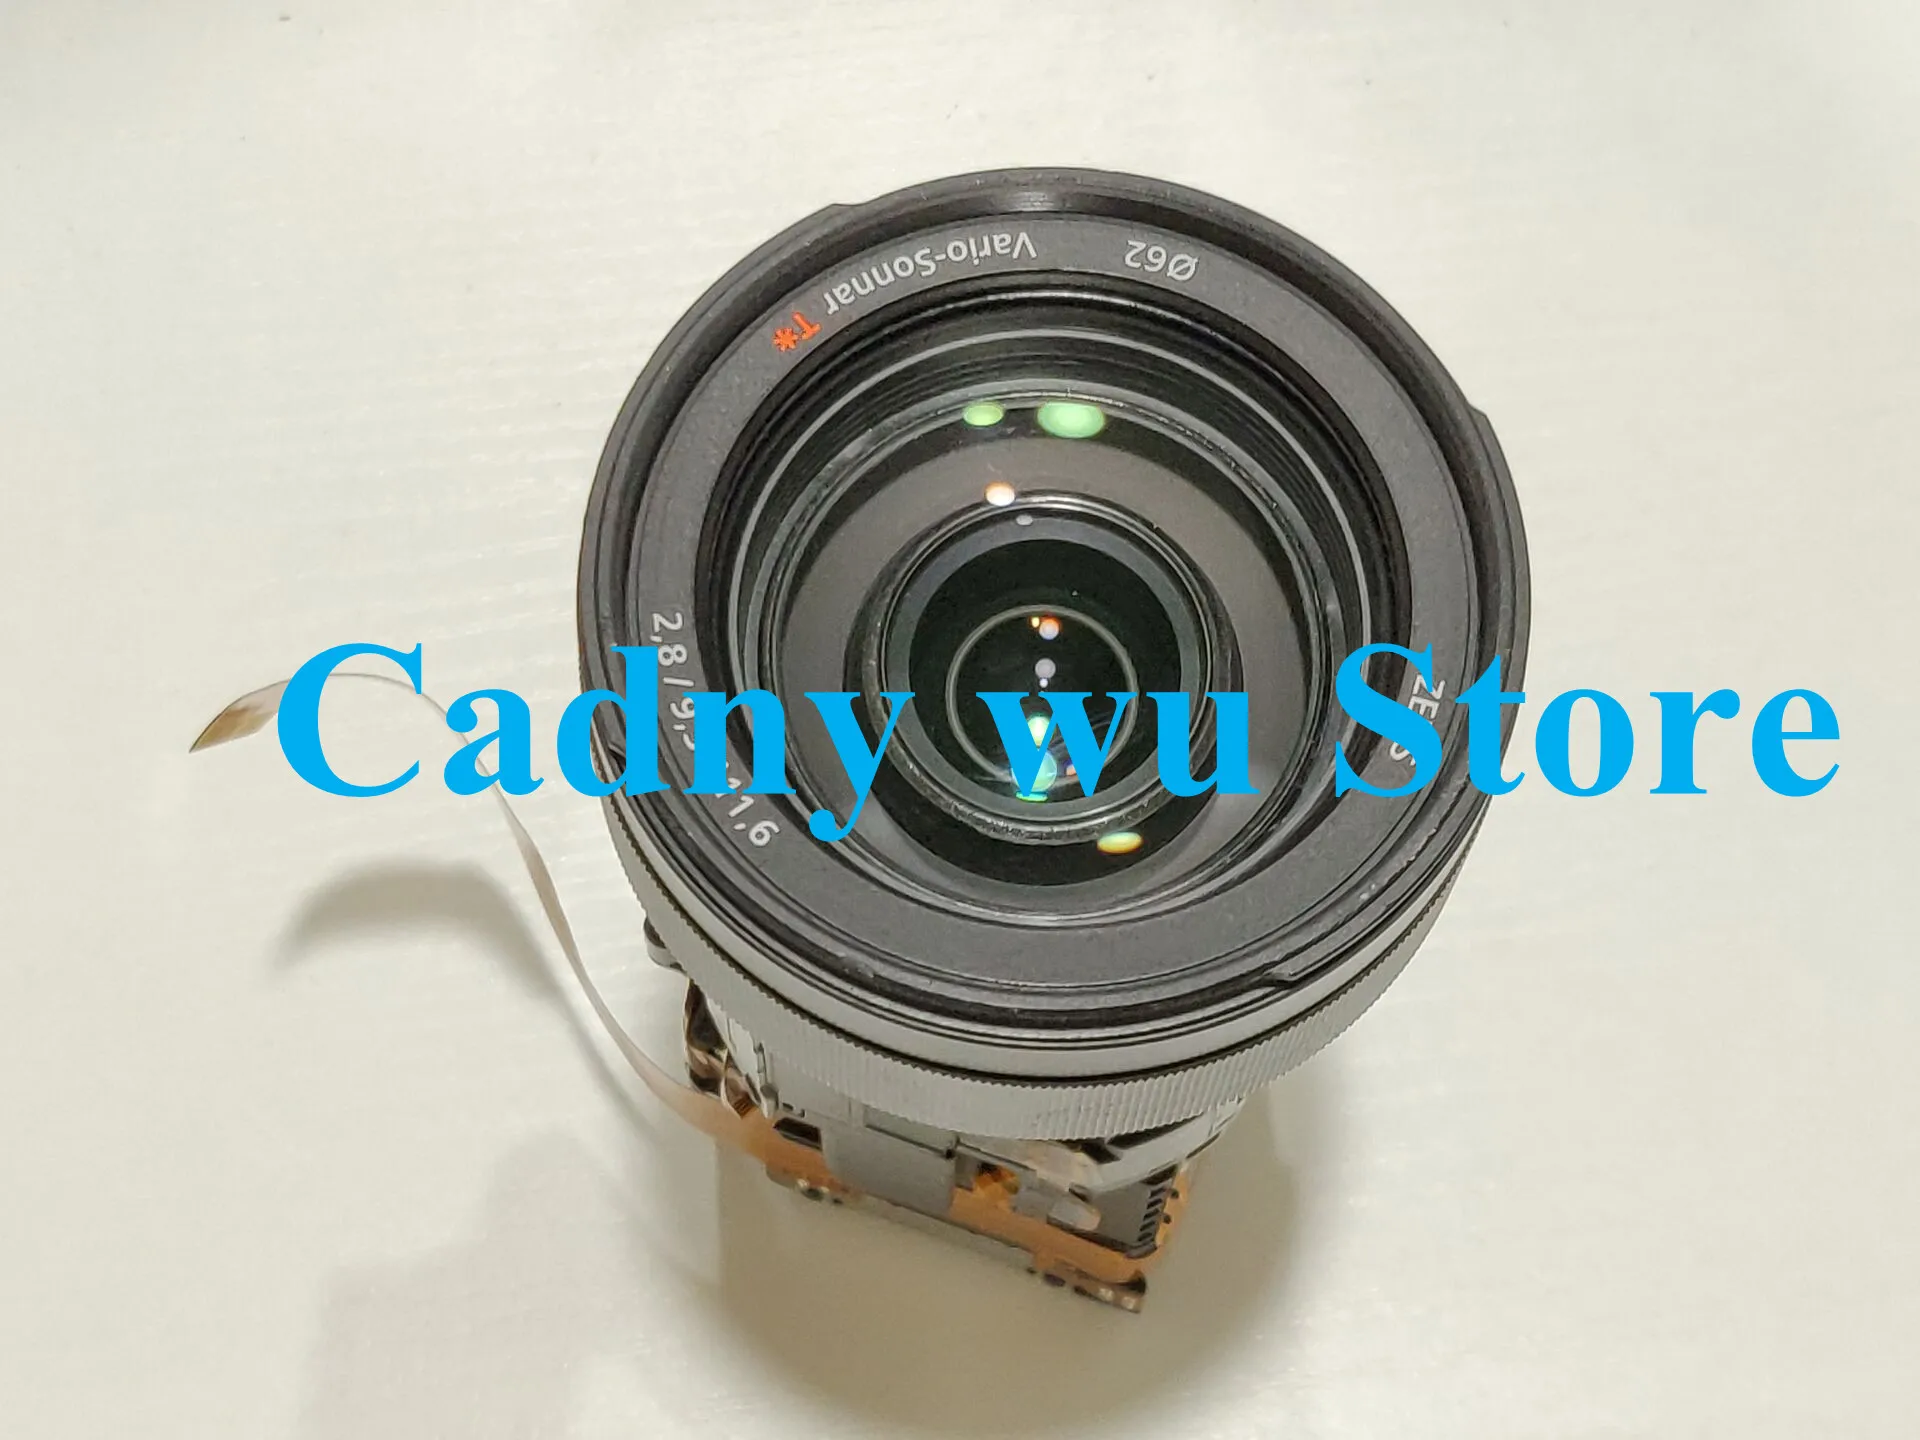 

95%NEW Repair Parts Lens Zoom Ass'y No CCD Unit For Sony HDR-CX900 PXW-X70 FDR-AX100